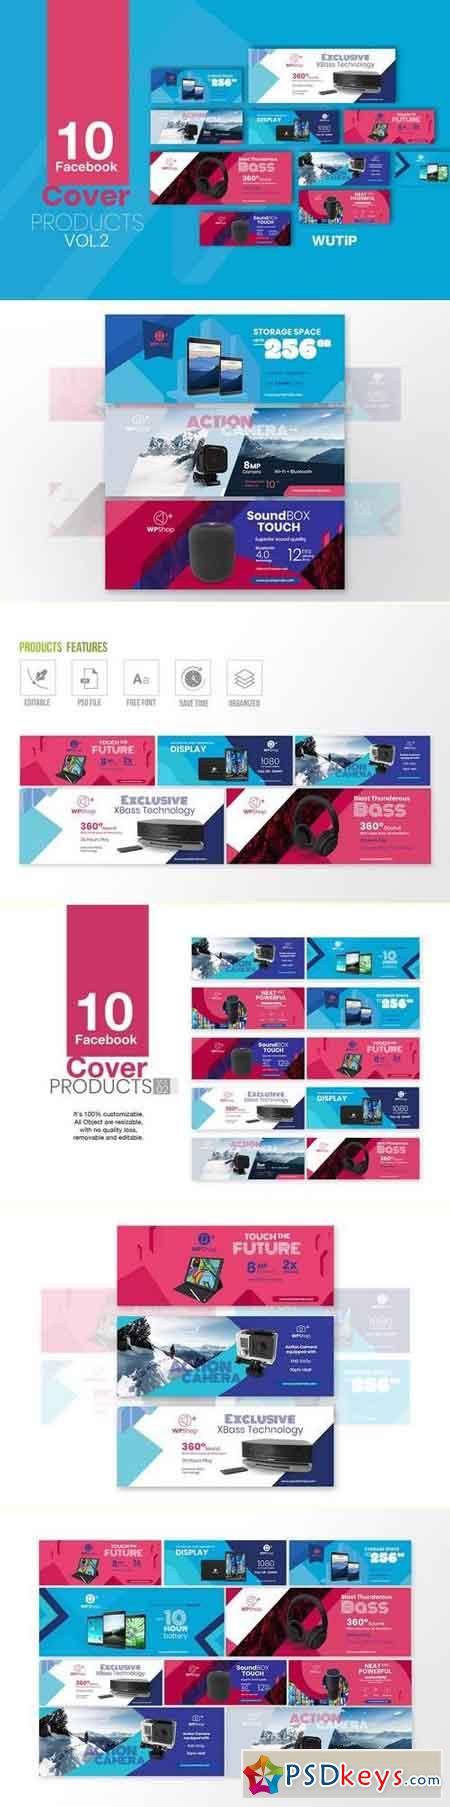 10 Facebook Cover-Products Vol2